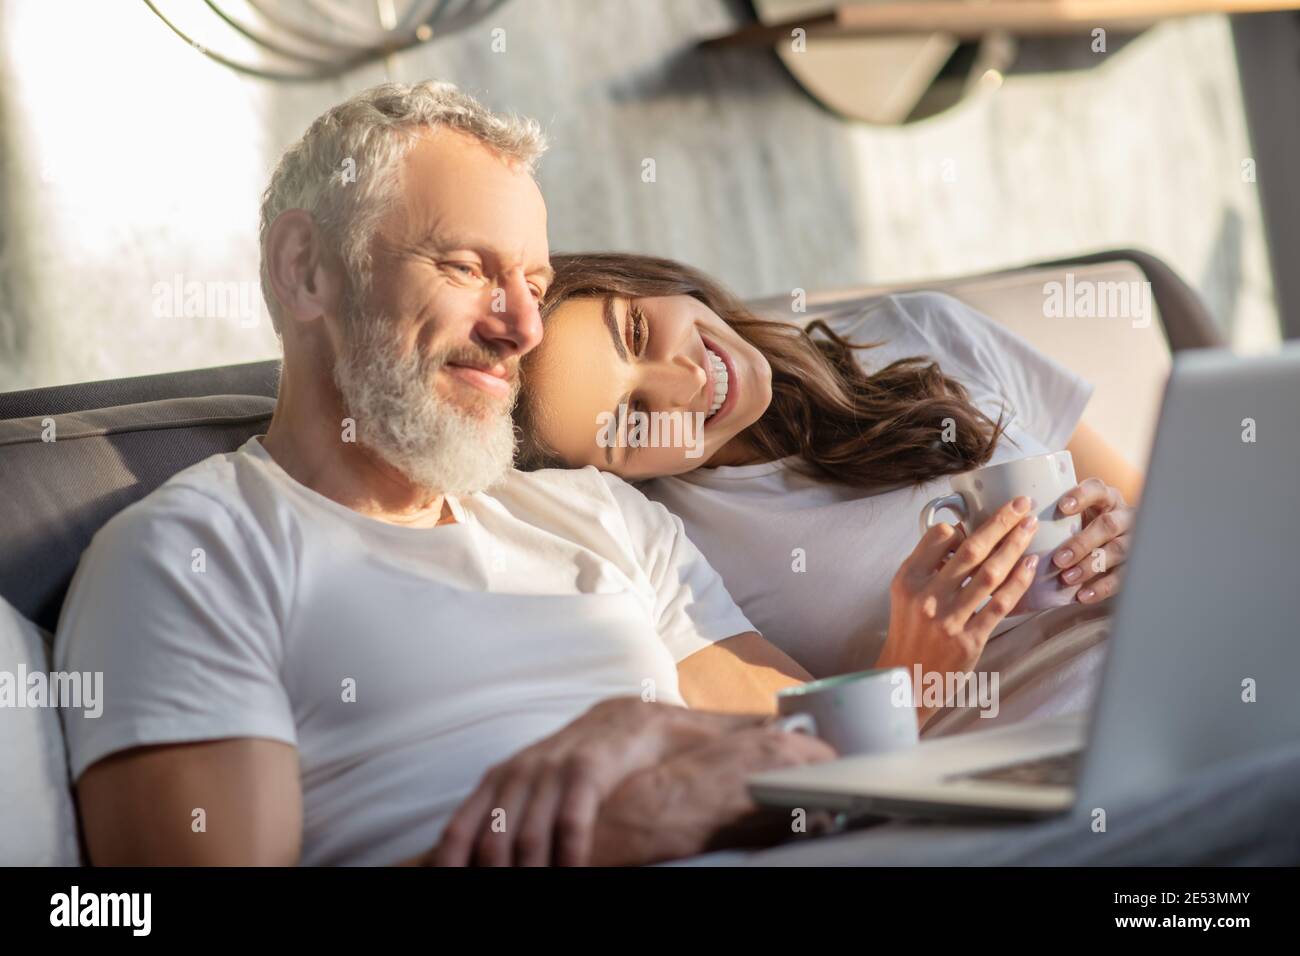 Woman touching her head on mans shoulder Stock Photo